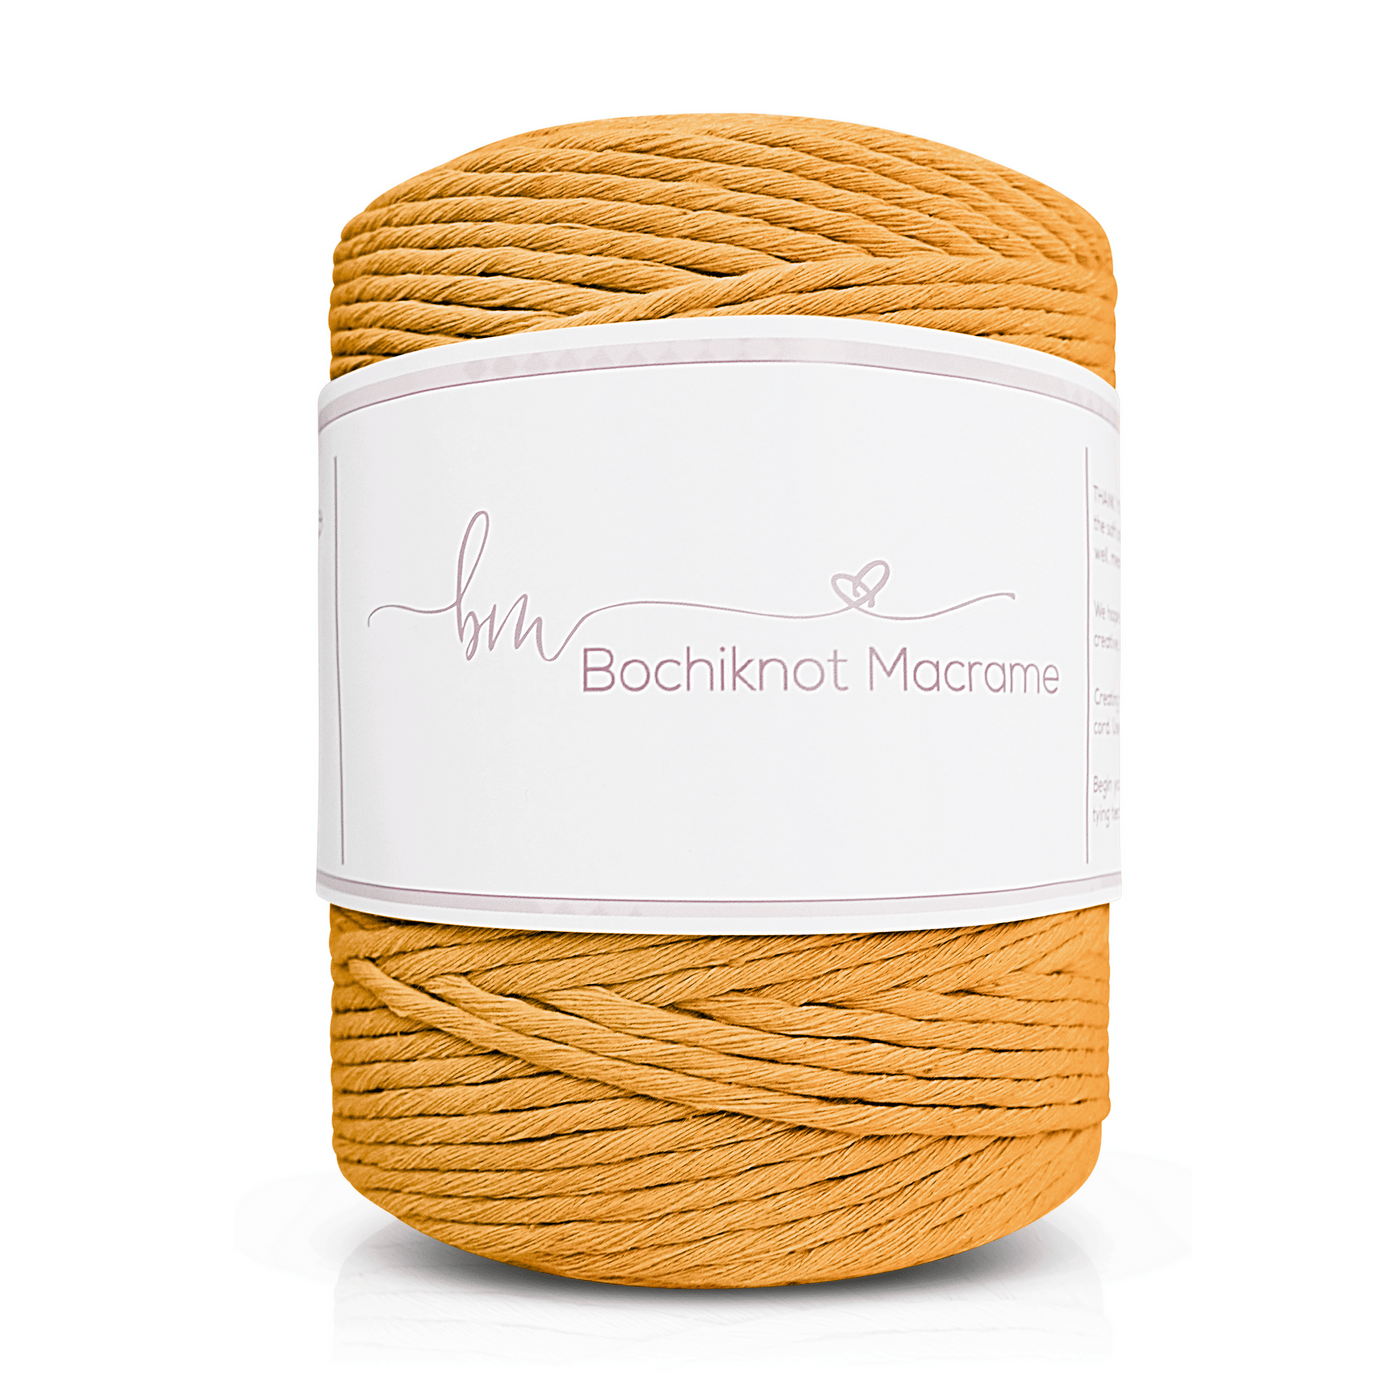 Clearance Recycled 5mm Single Stand Cotton Cord (Squash)